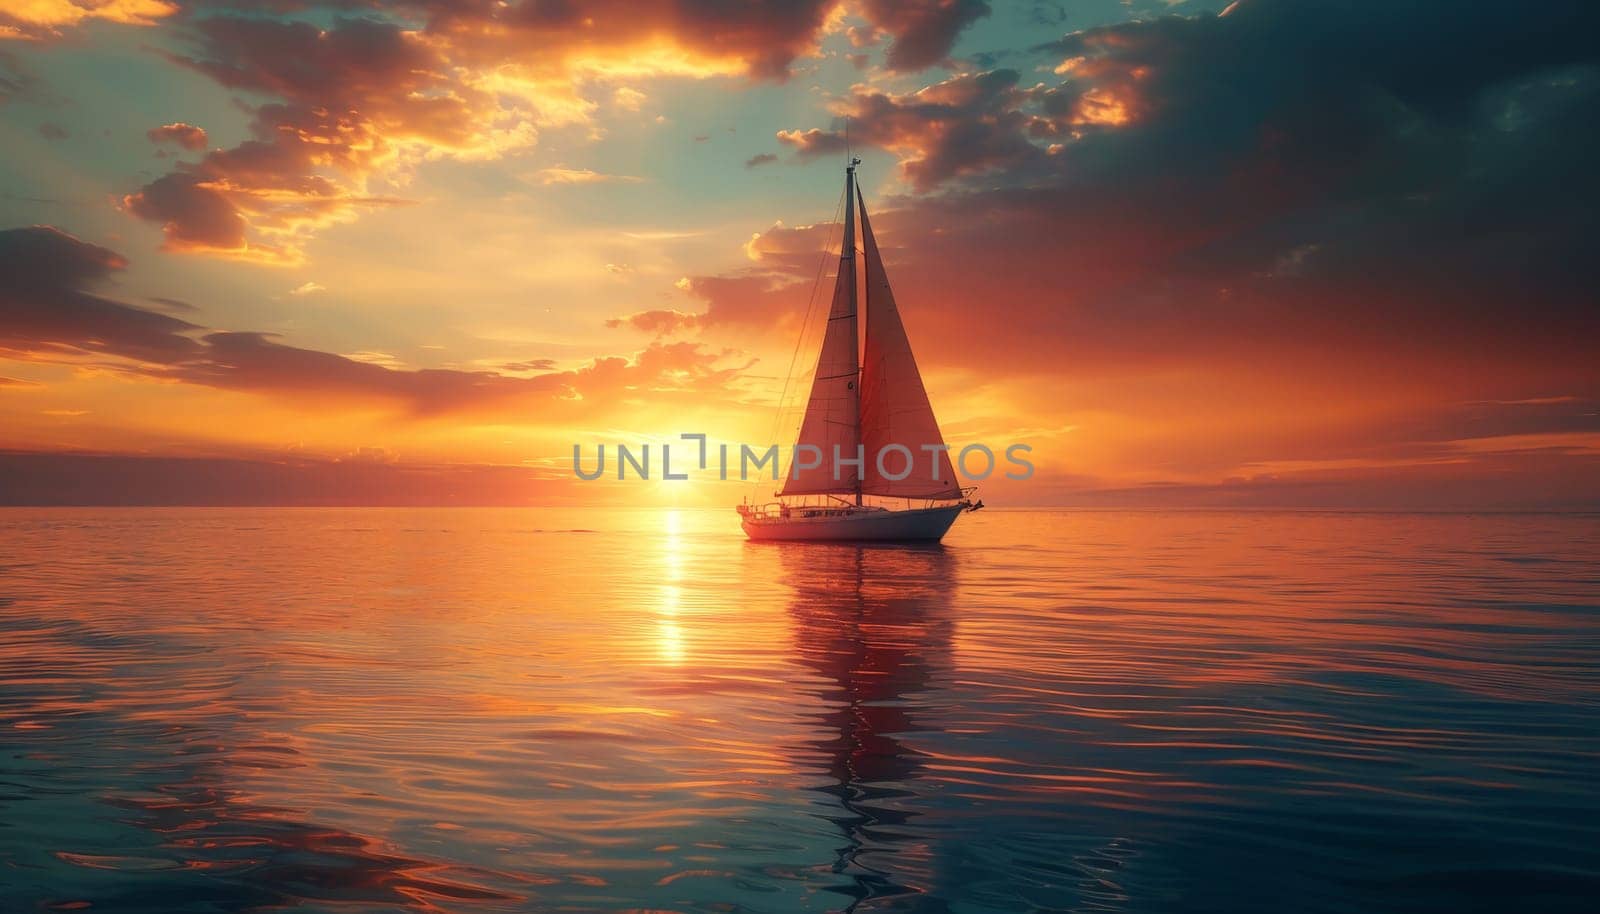 A sailboat is sailing on a calm ocean at sunset. The sky is filled with clouds and the sun is setting, creating a beautiful and serene atmosphere